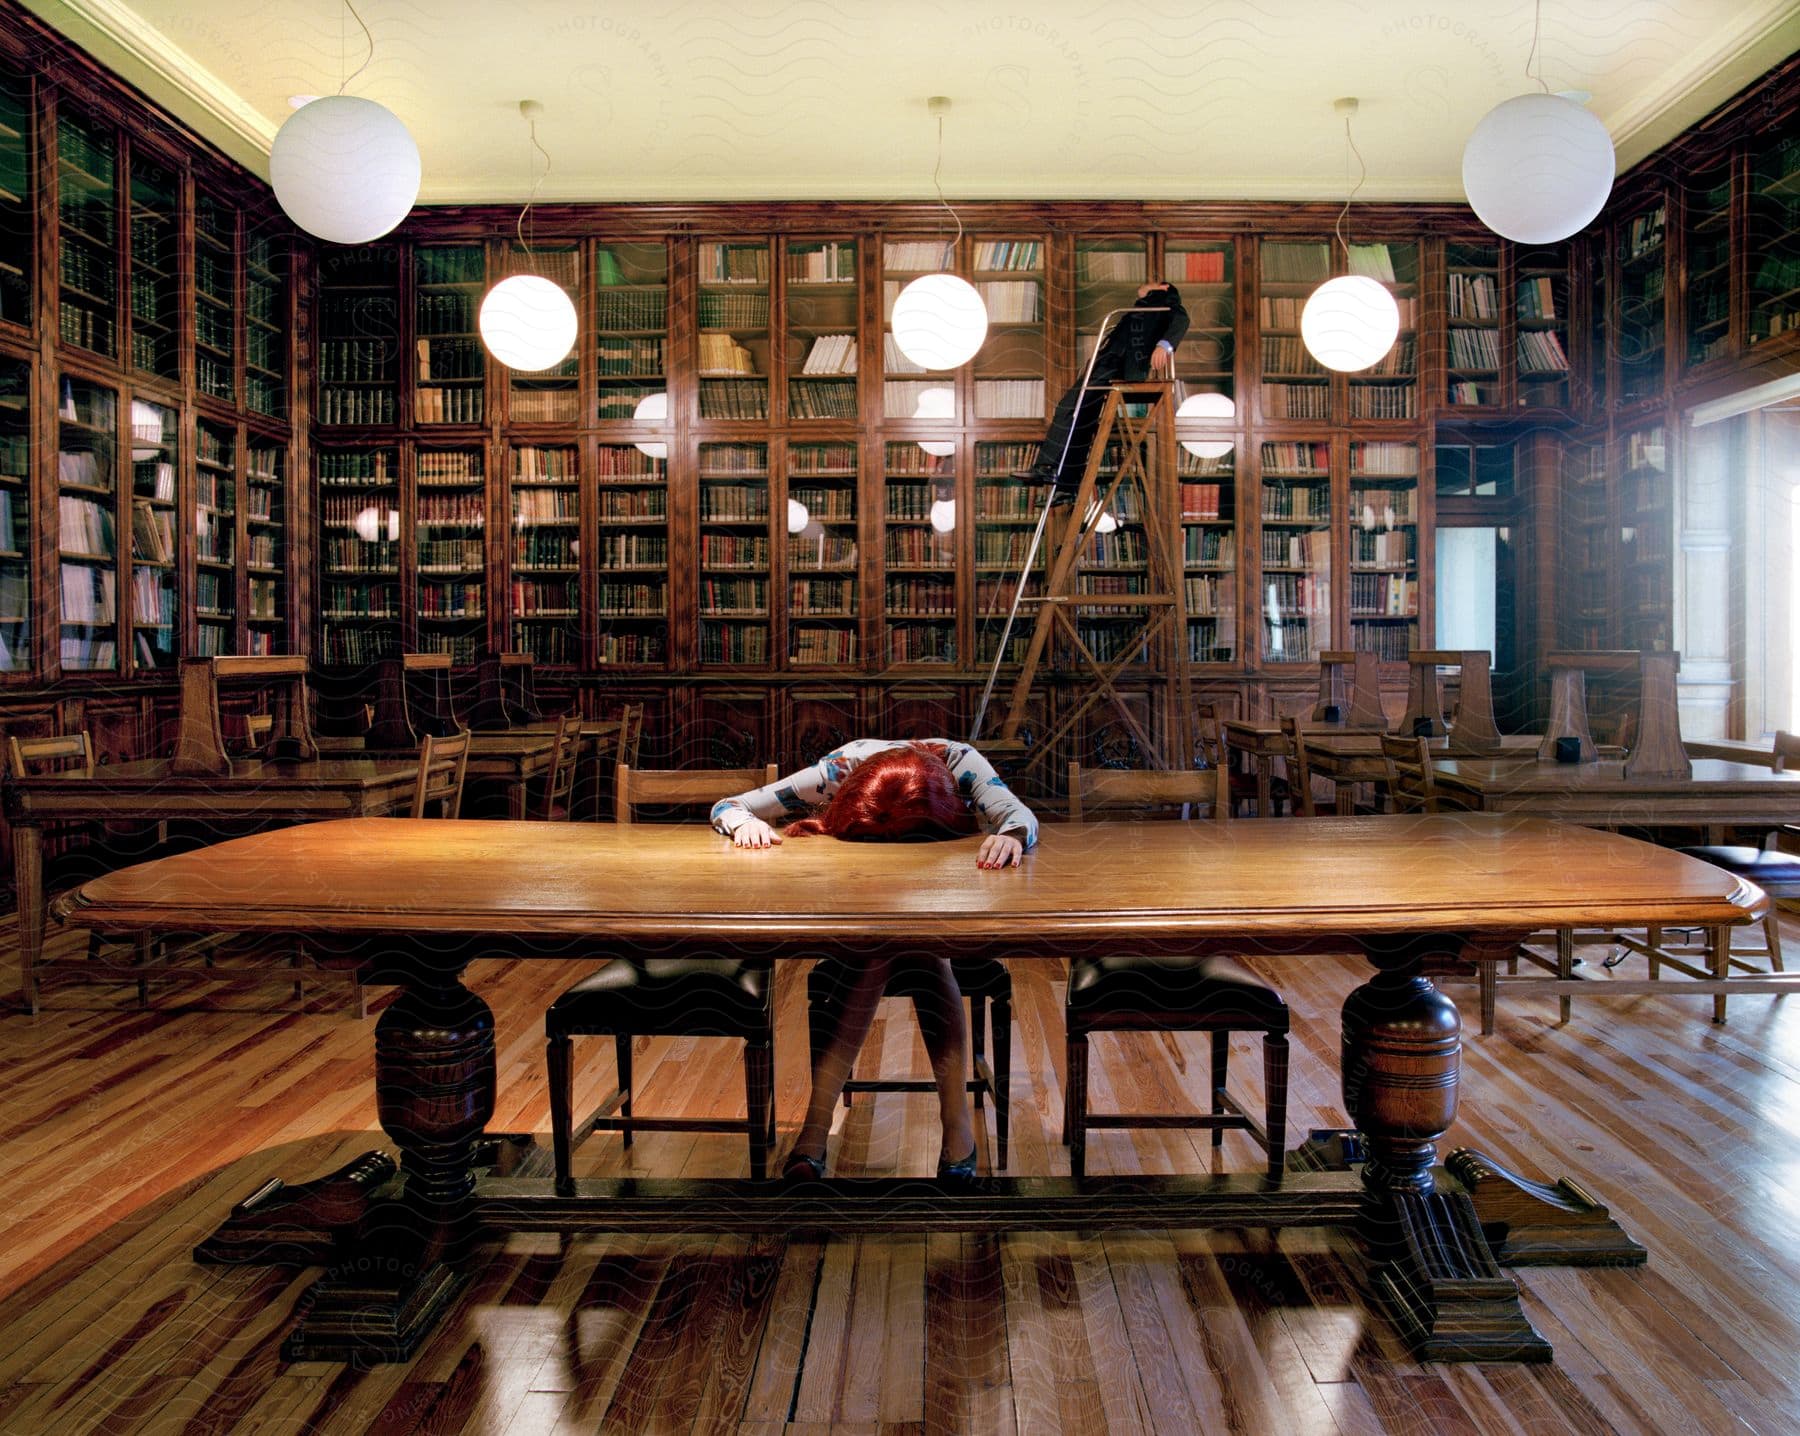 A man sleeps on a ladder behind a woman asleep at a table in a library